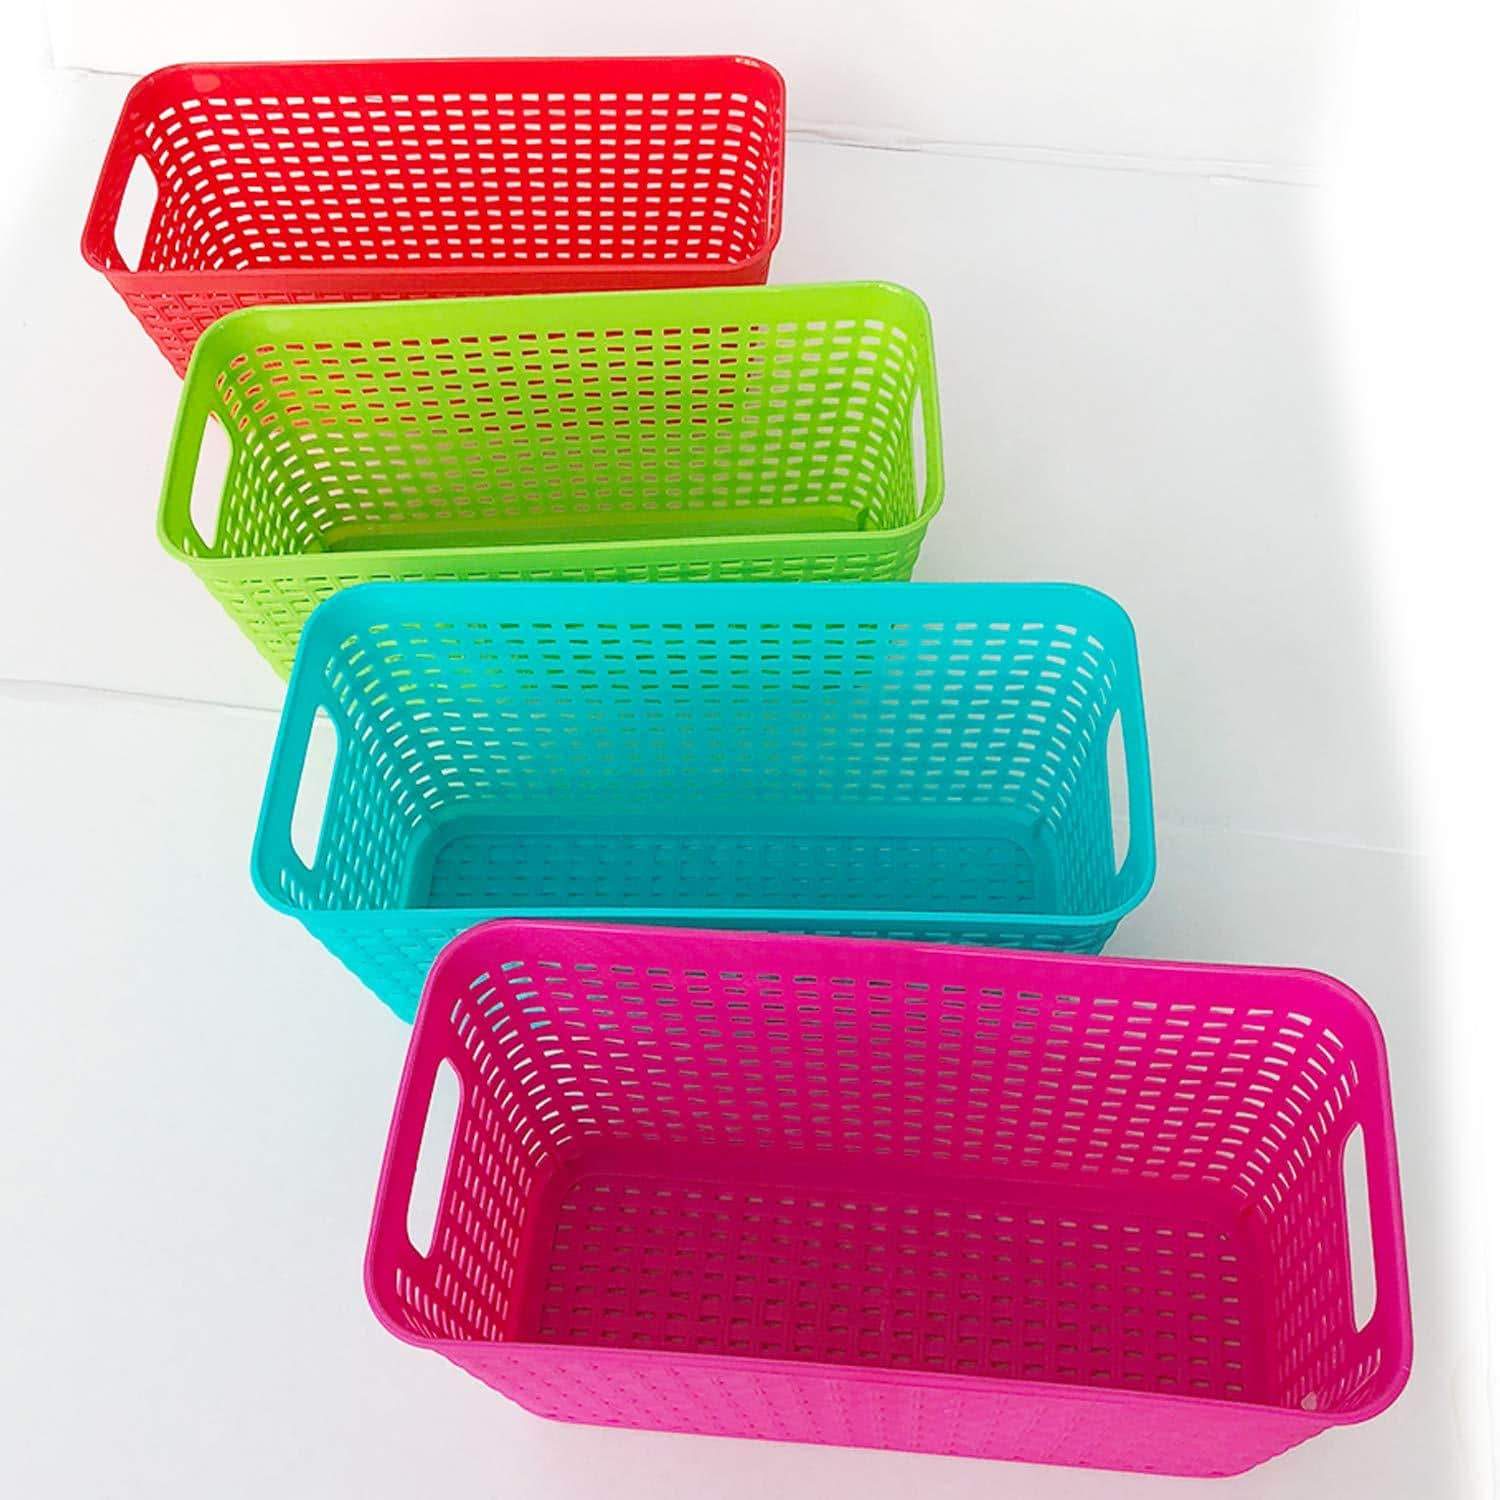 Best plastic baskets pantry organization and storage kitchen cabinet spice rack organizer for food shelf small colorful rectangle tray organizing for desks drawers weave deep closets art lockers set of 4